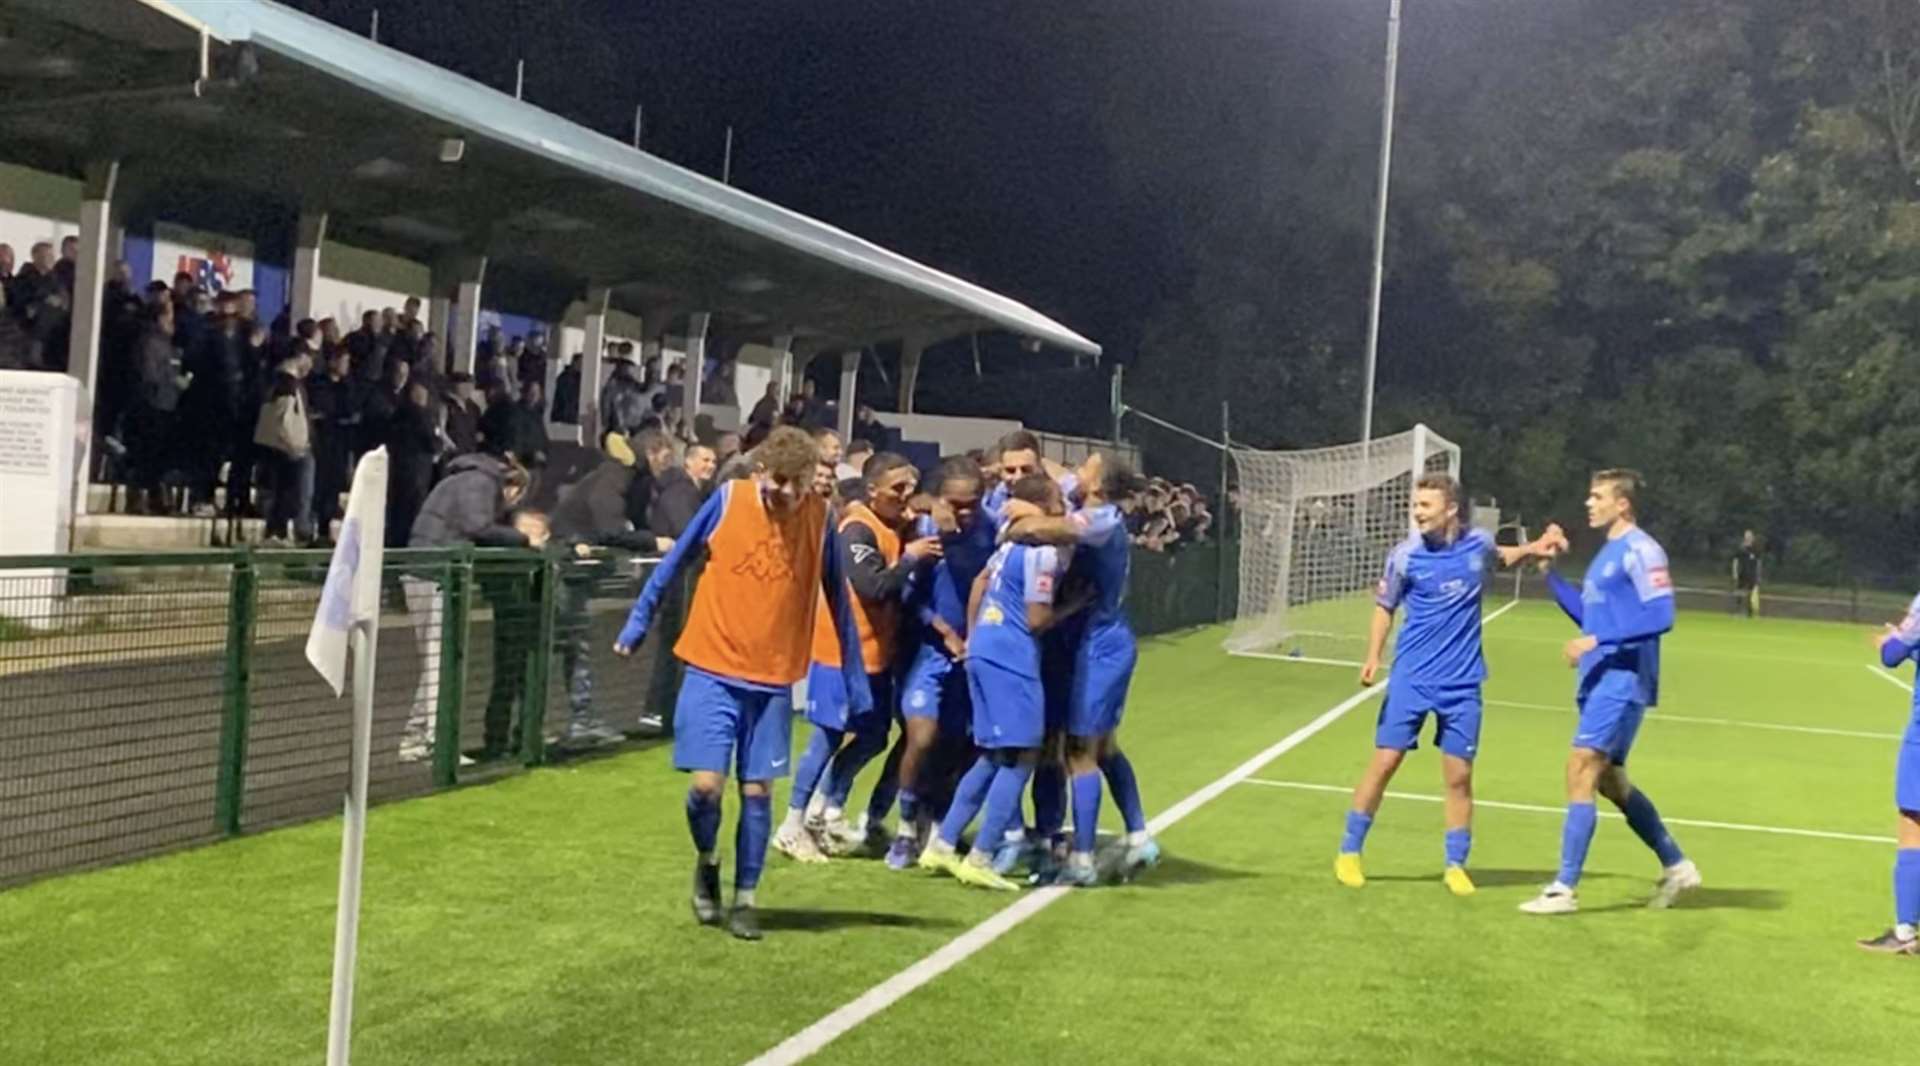 Celebrations after the first goal at Herne Bay's win over Lewes